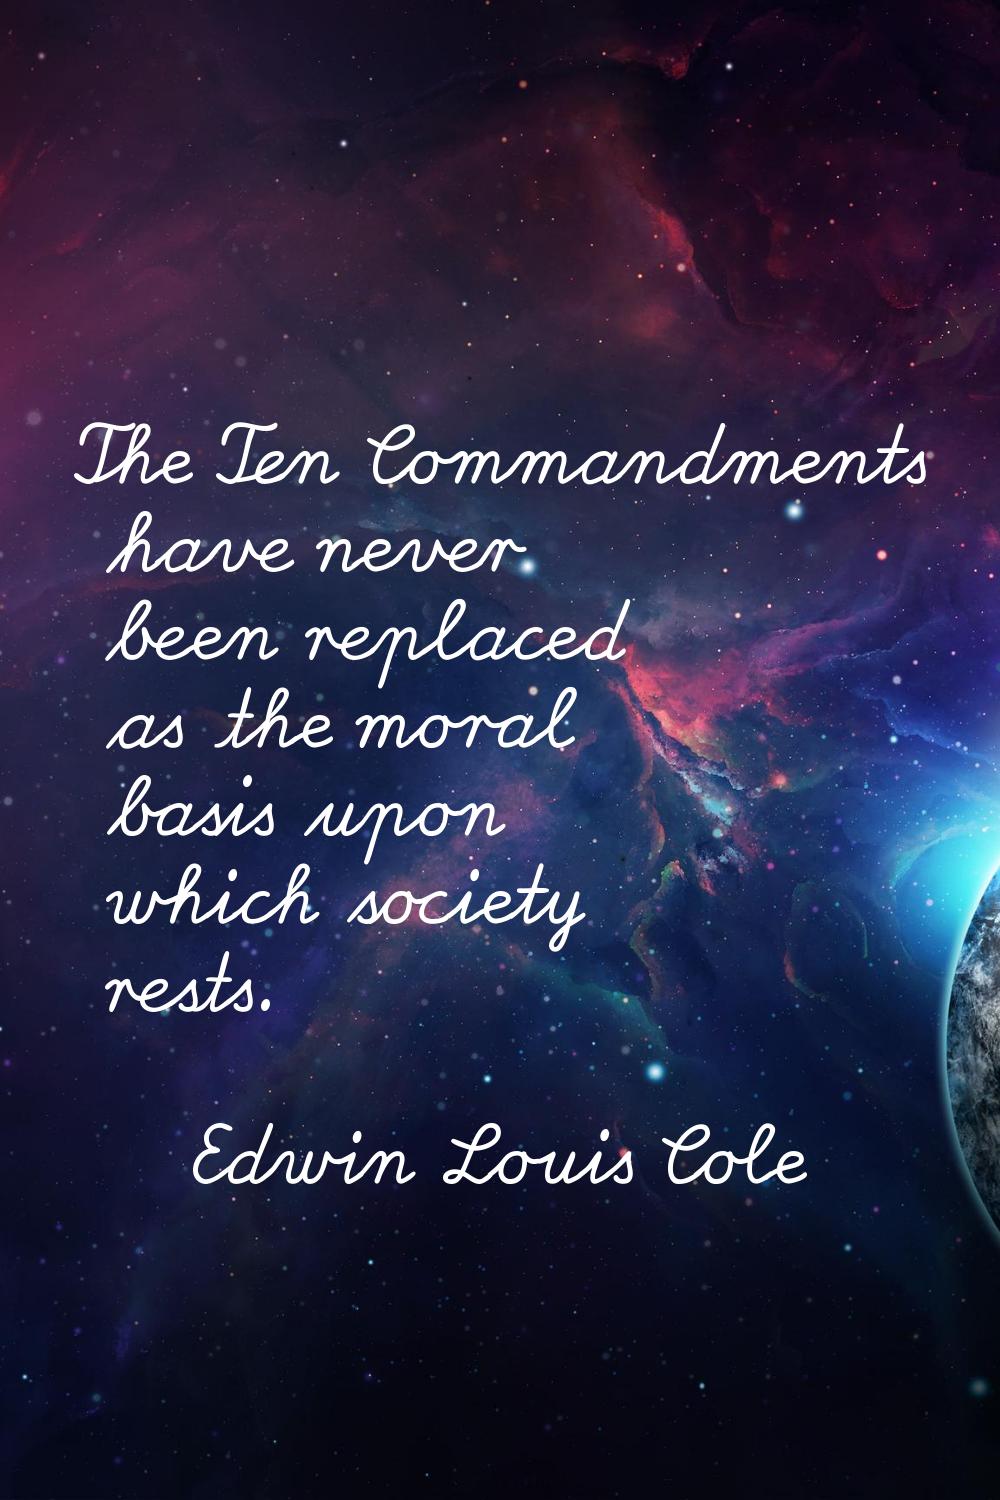 The Ten Commandments have never been replaced as the moral basis upon which society rests.